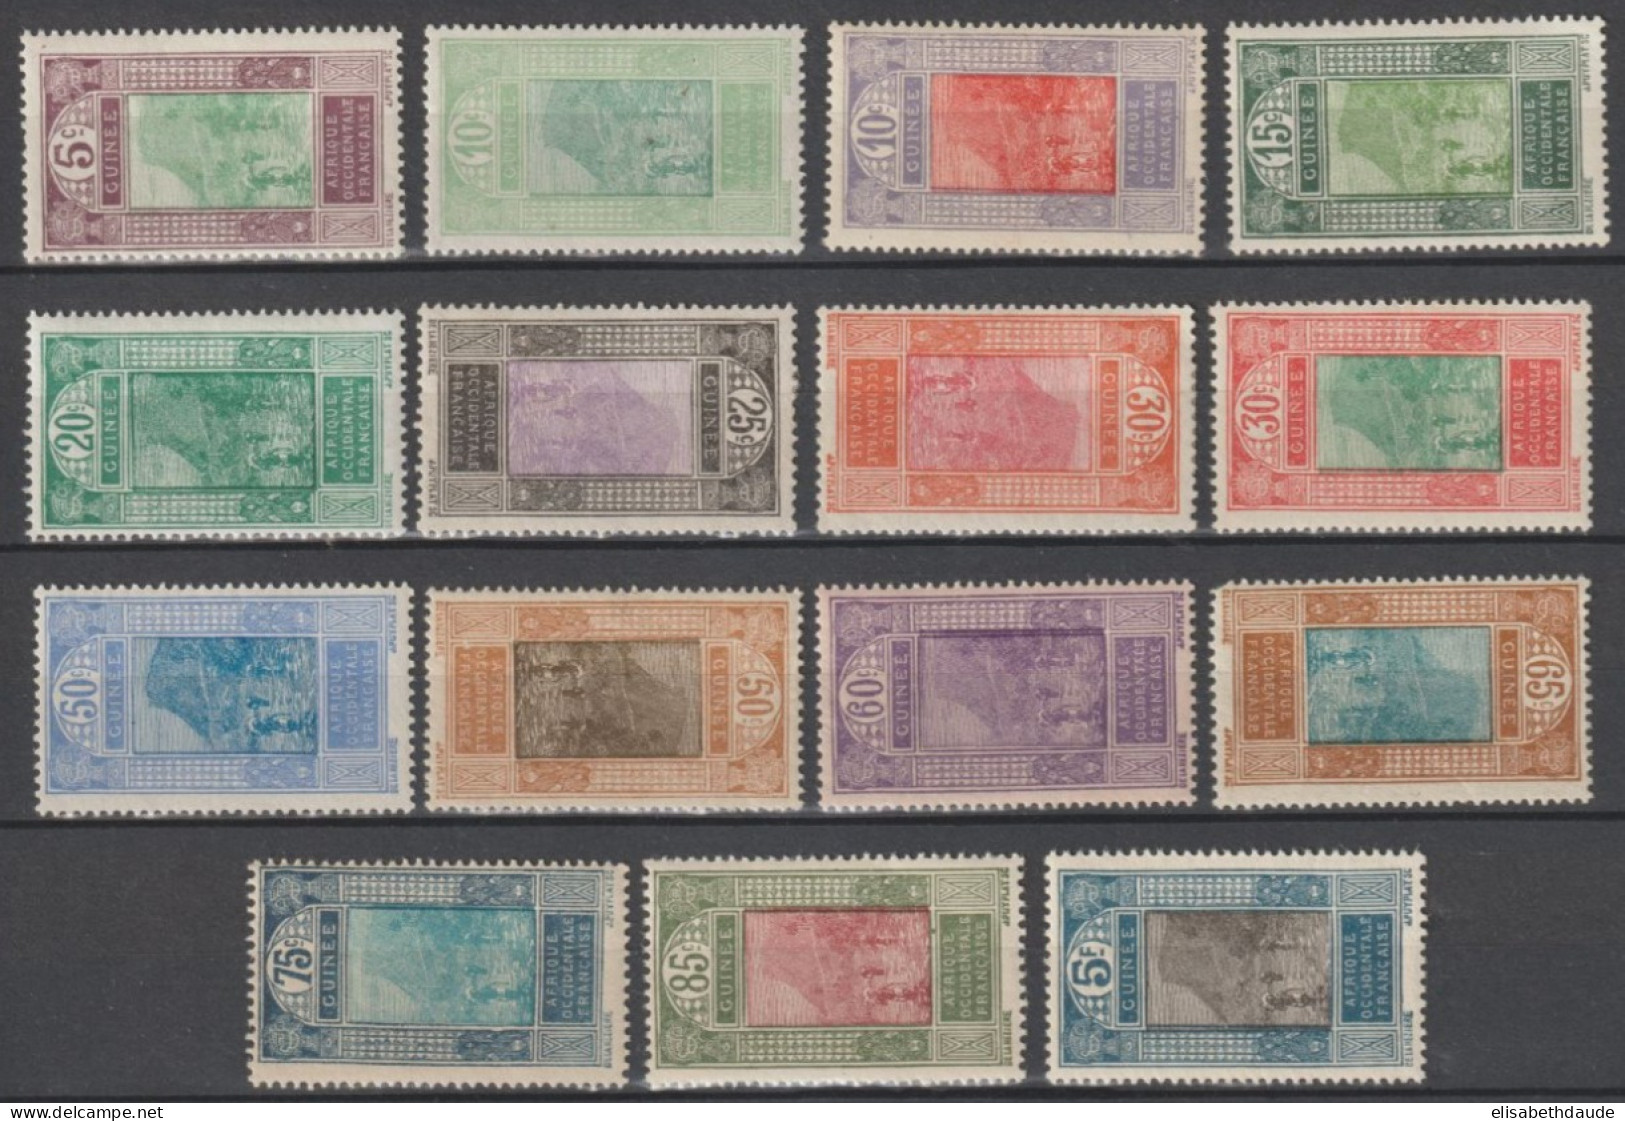 GUINEE - 1922 - SERIE COMPLETE YVERT N°84/98 ** MNH (QUELQUES * MH) - COTE = 22 EUR - Unused Stamps